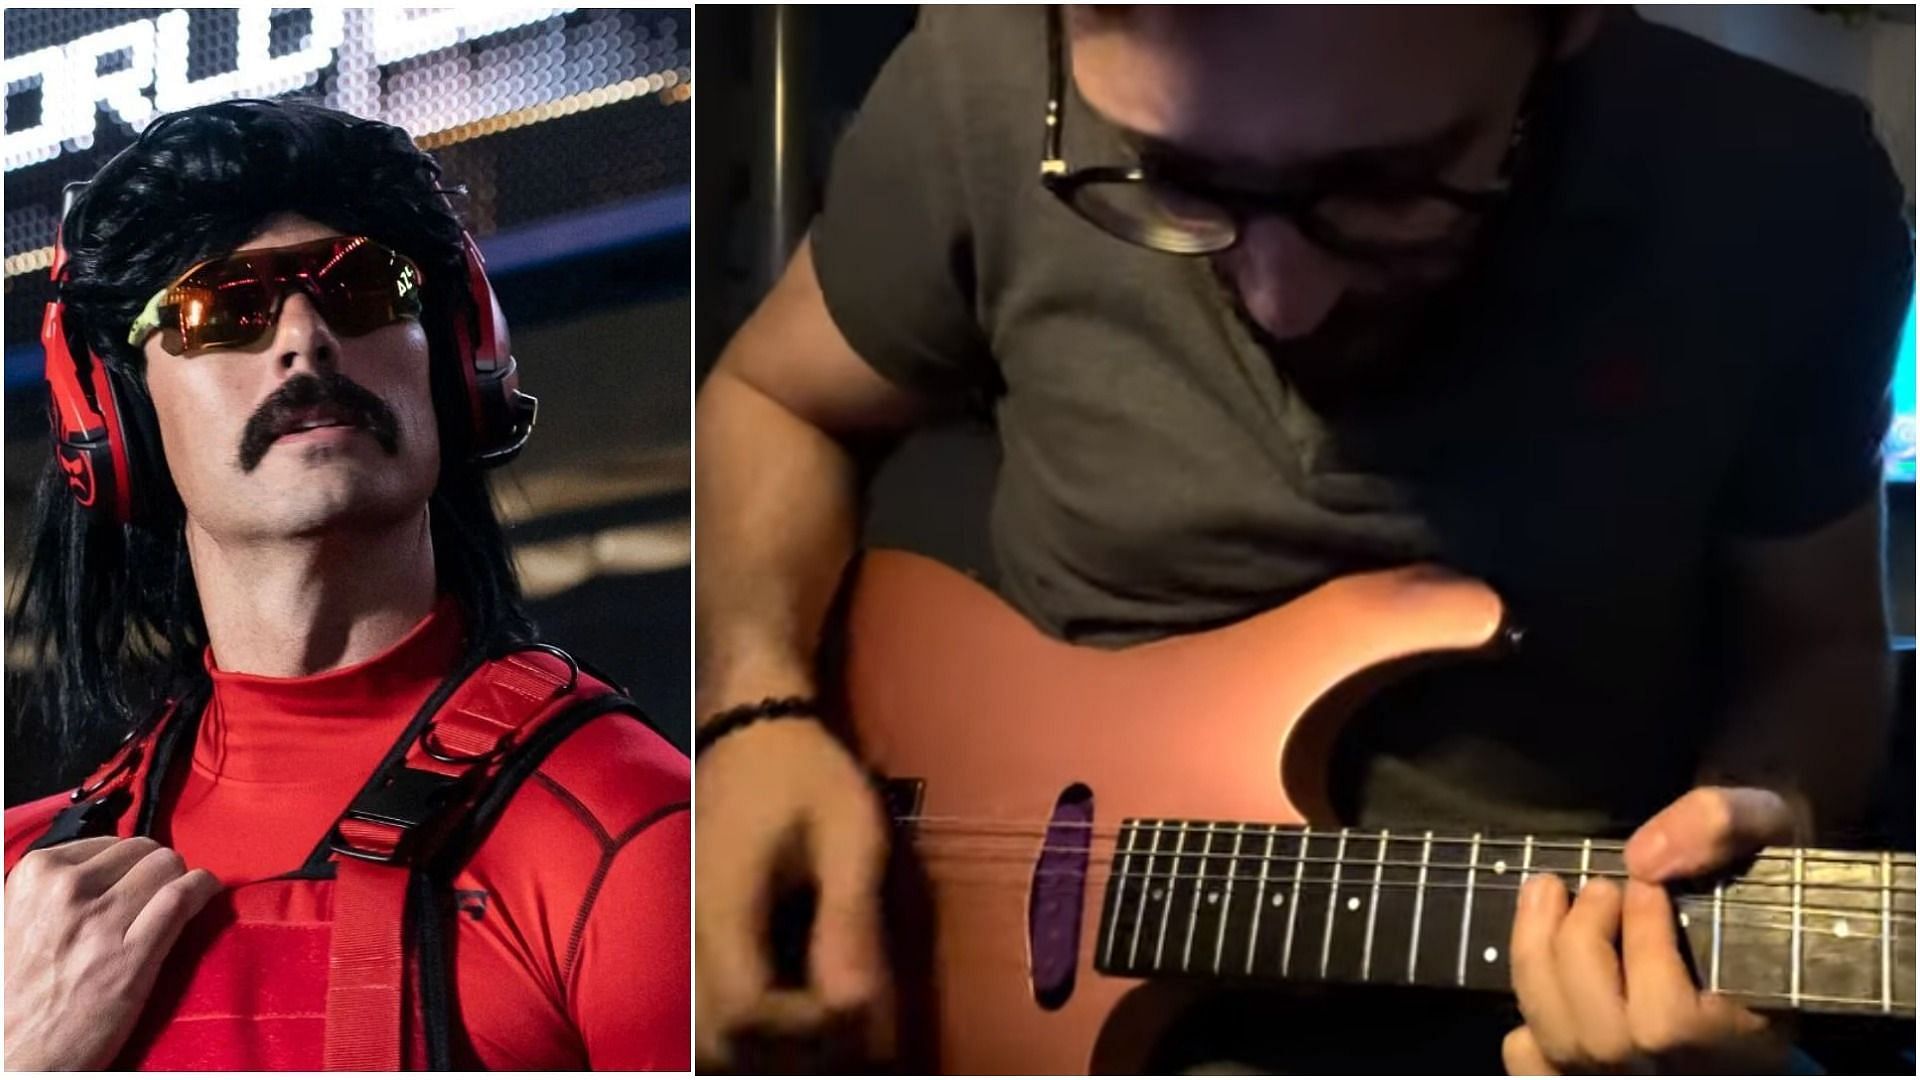 YouTuber shares an impressive 80s style guitar solo inspired by Dr DisRespect (Image via Dr DisRespect/YouTube and Ahmad Sleeq/YouTube)